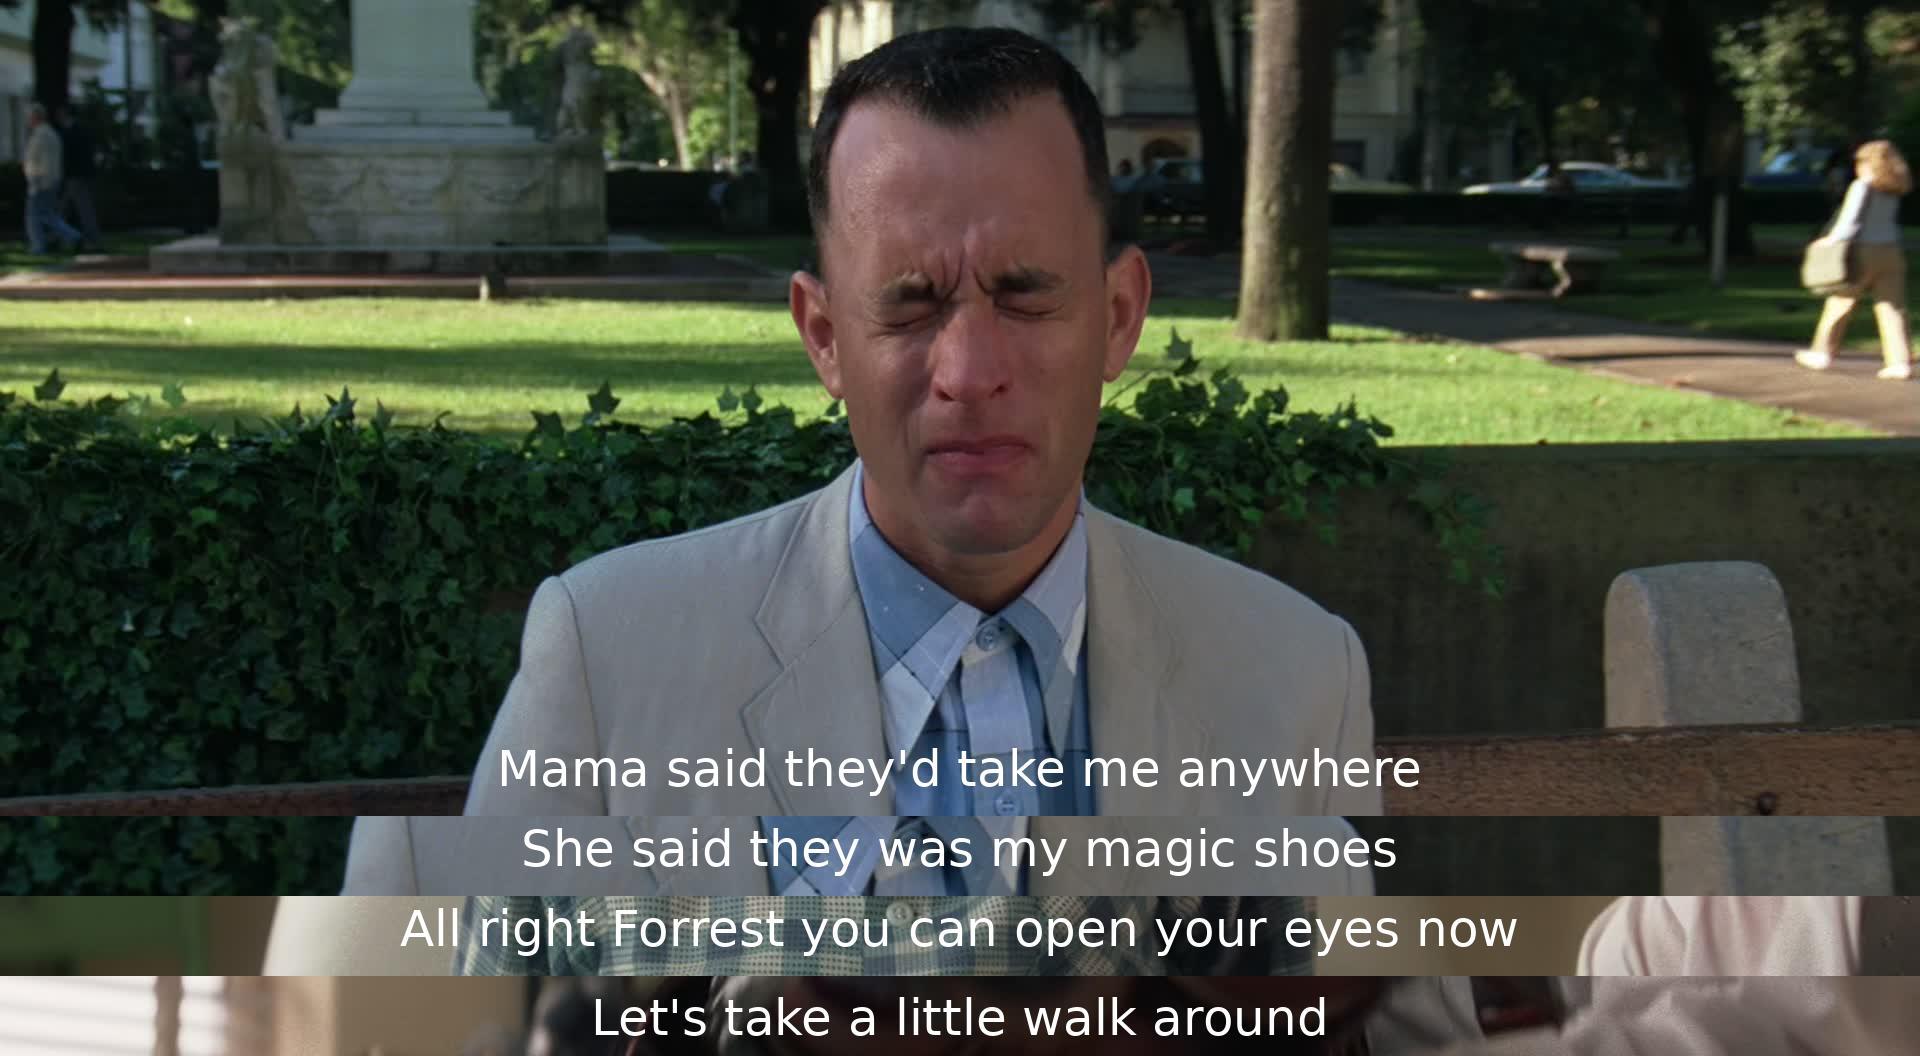 A mother gives her son magic shoes to take him anywhere. He is instructed to open his eyes and take a walk with someone named Forrest.